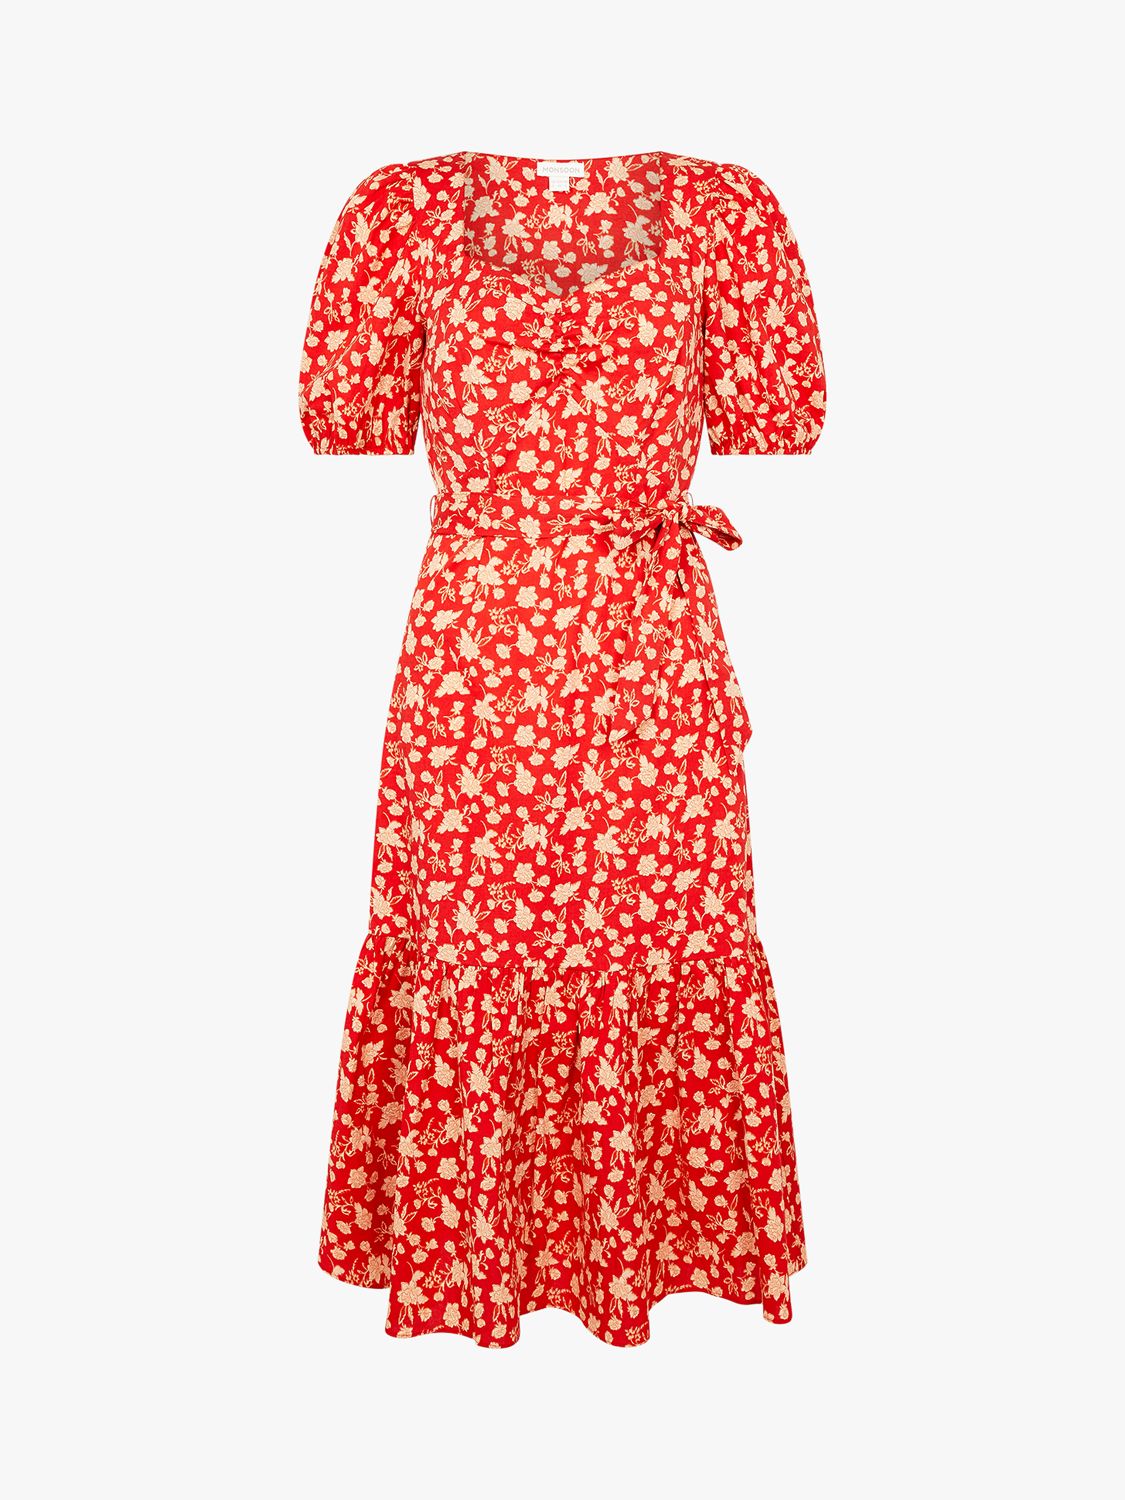 Monsoon Floral Print Tiered Midi Dress, Red